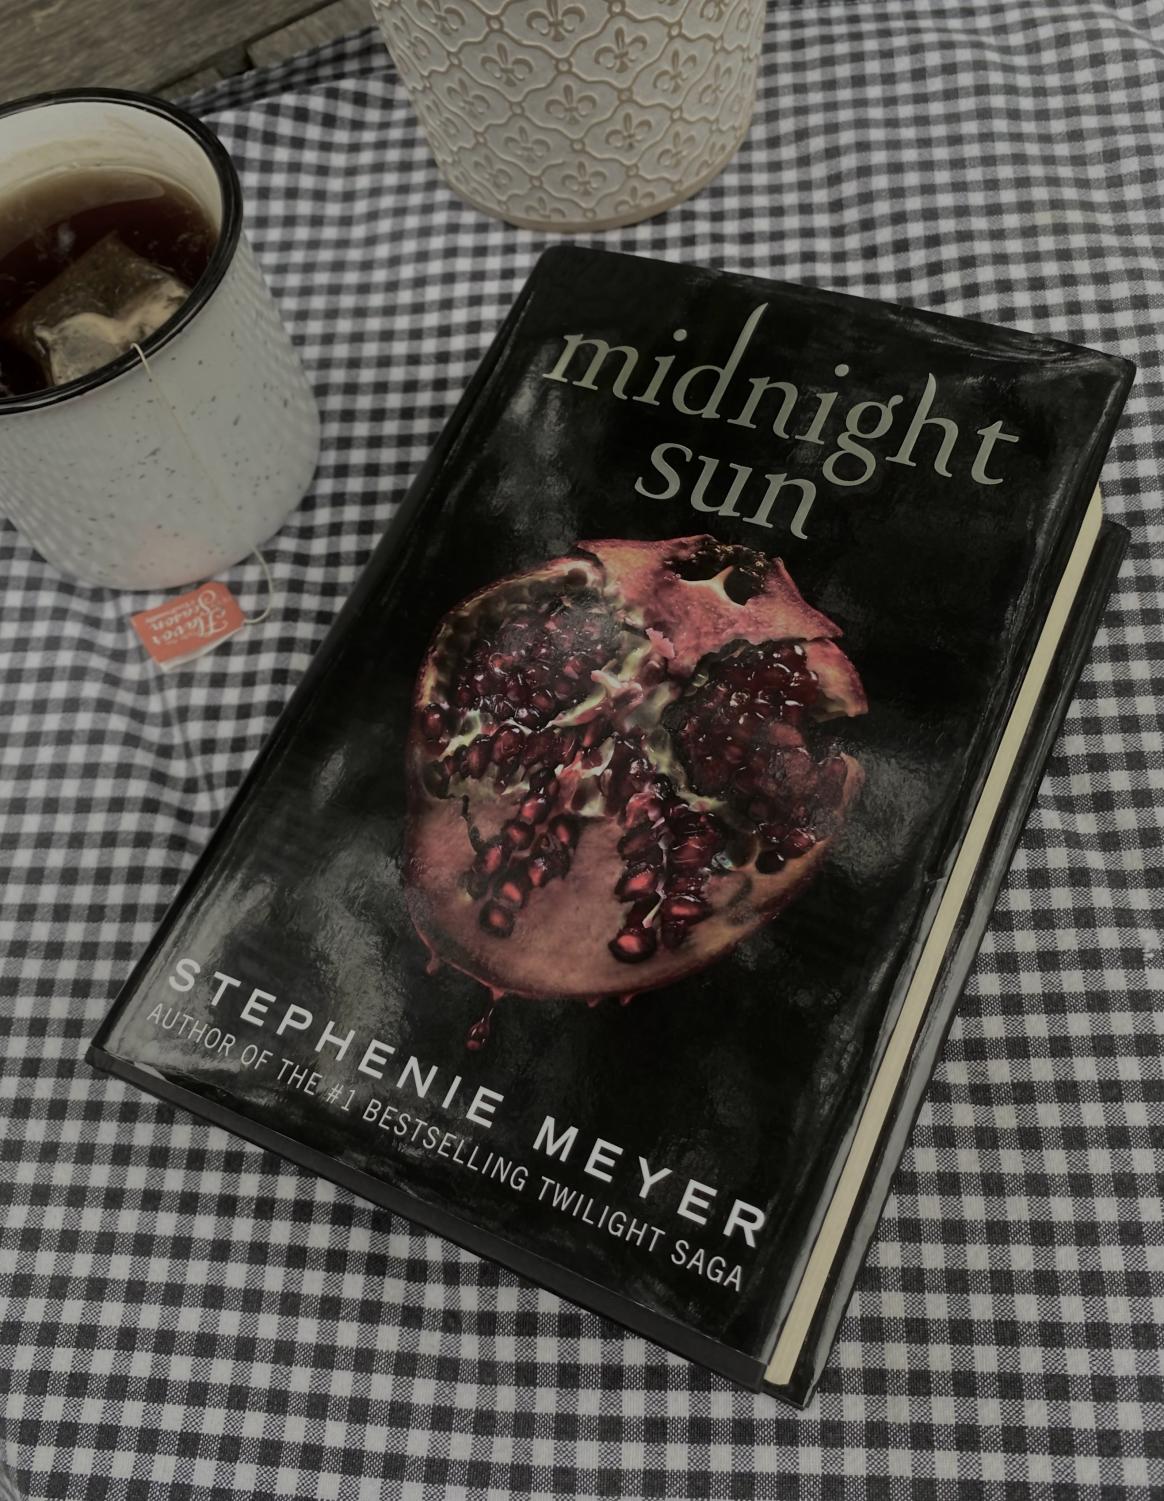 What Twilight fans need to know about the Midnight Sun book tour